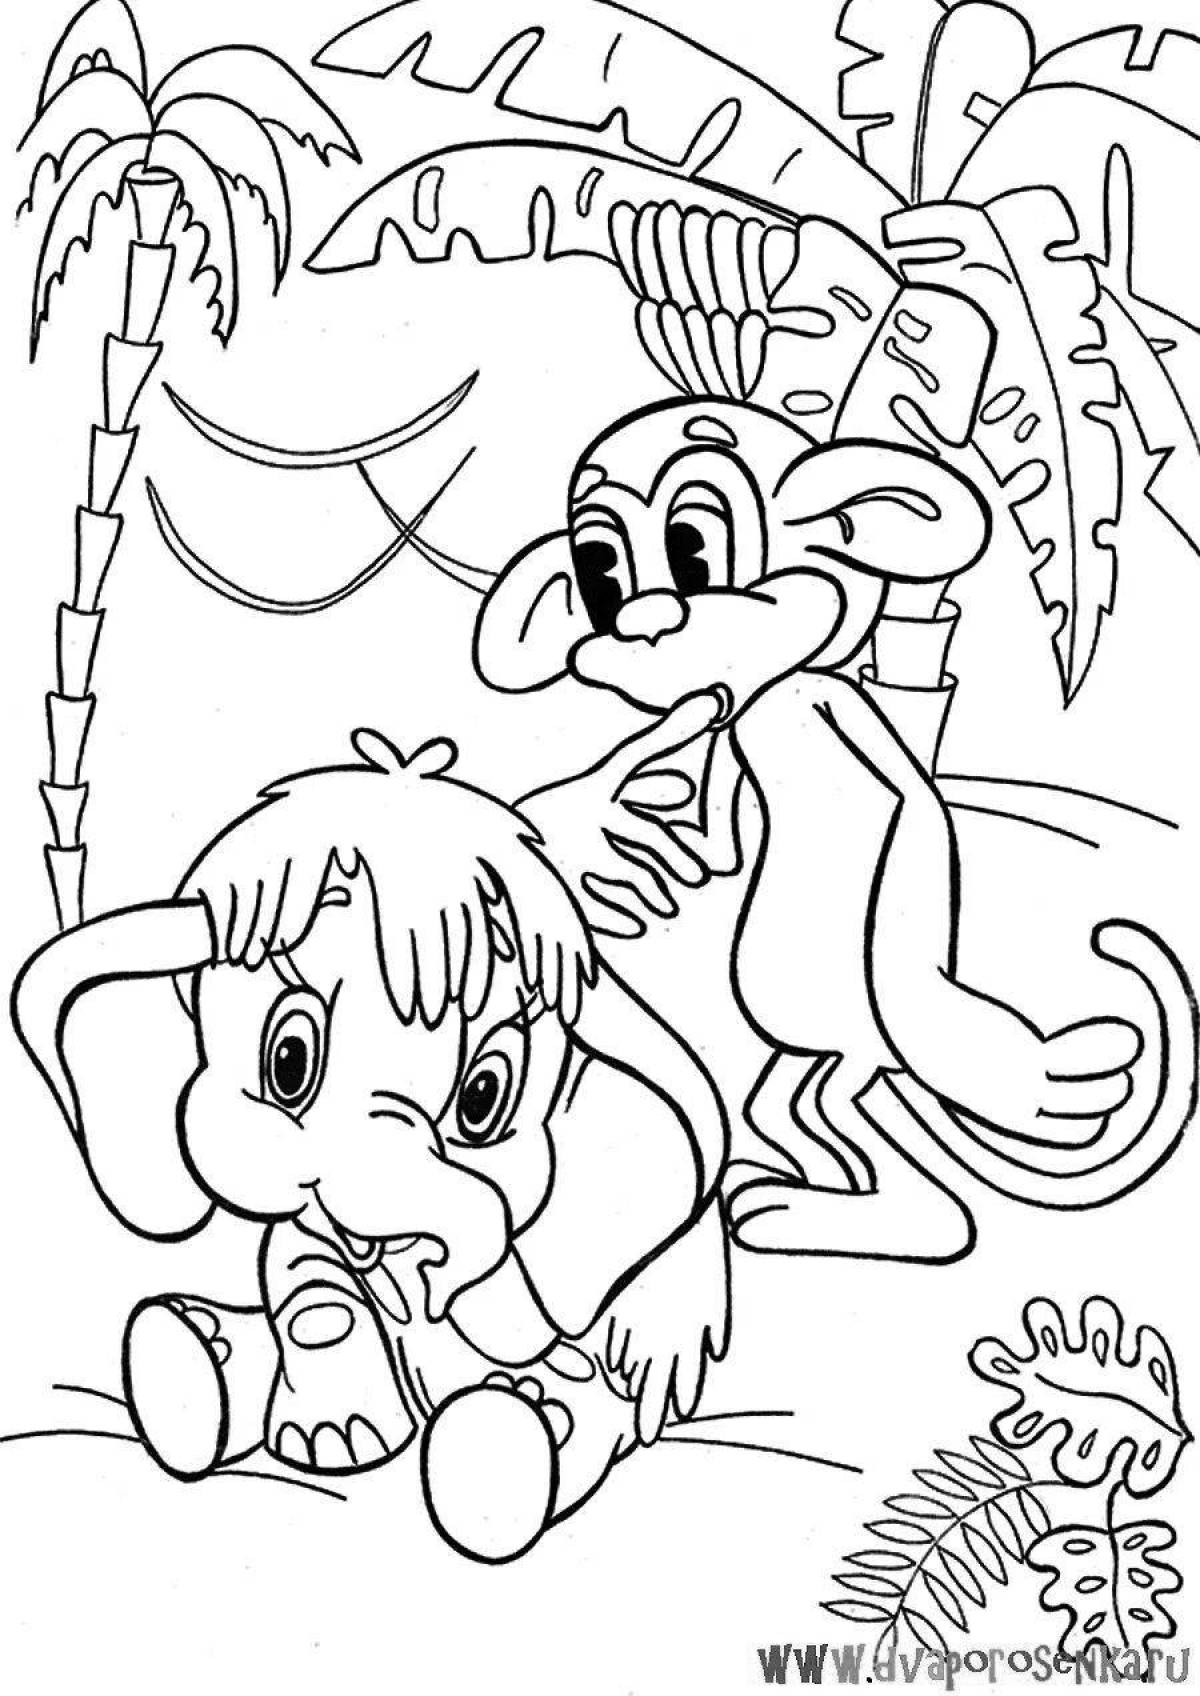 Mammoth fantasy coloring book for kids